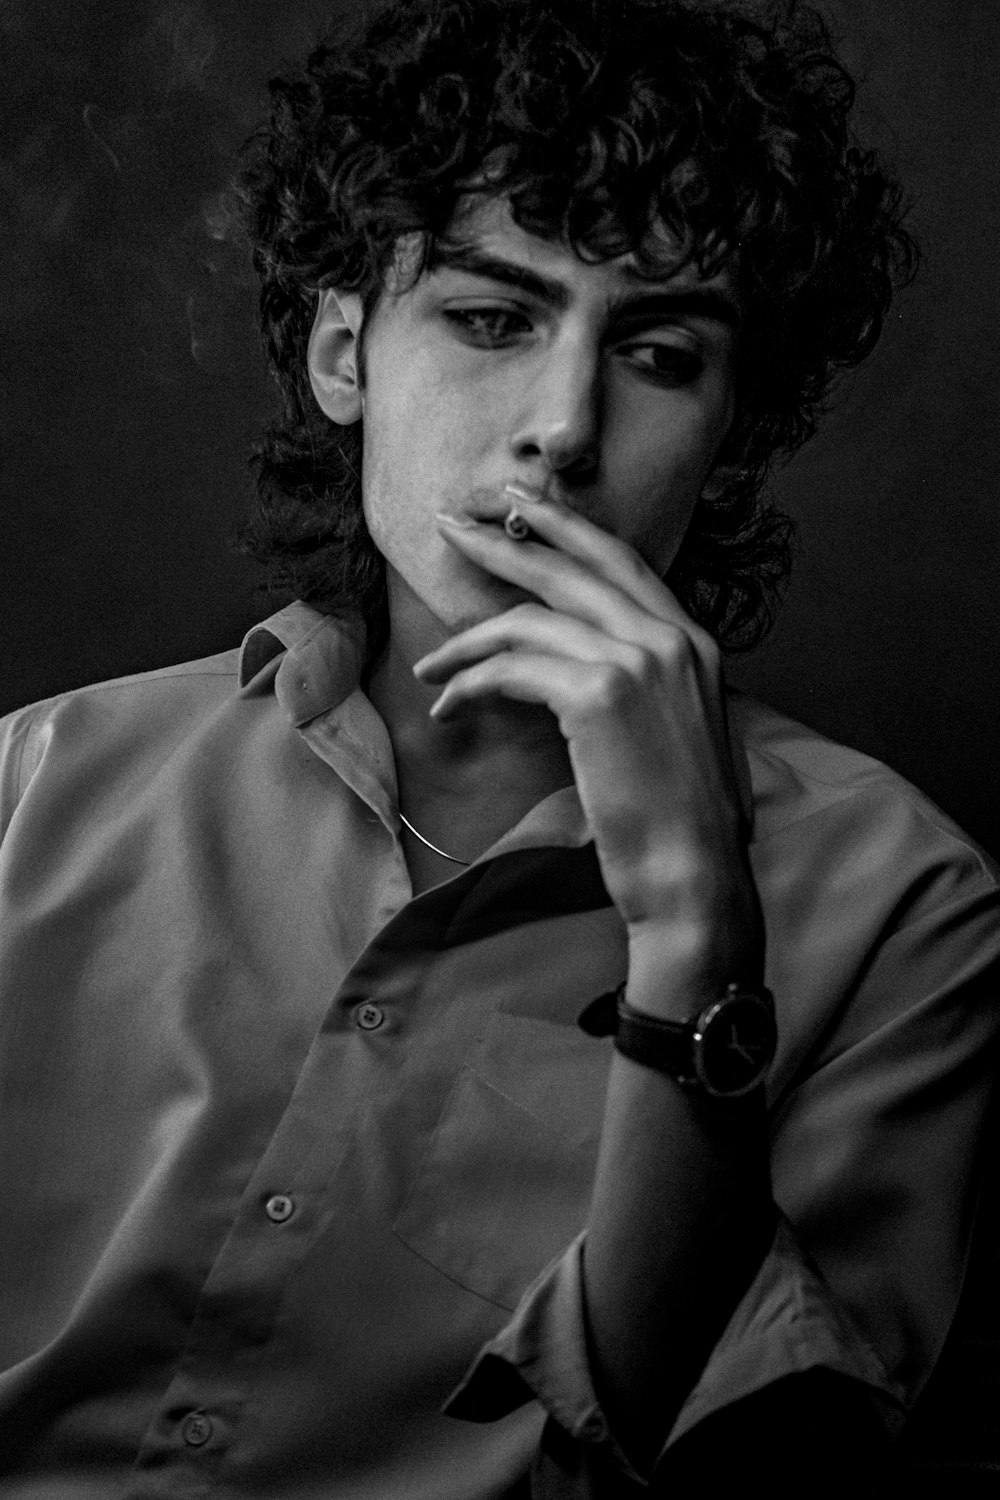 a man with curly hair smoking a cigarette